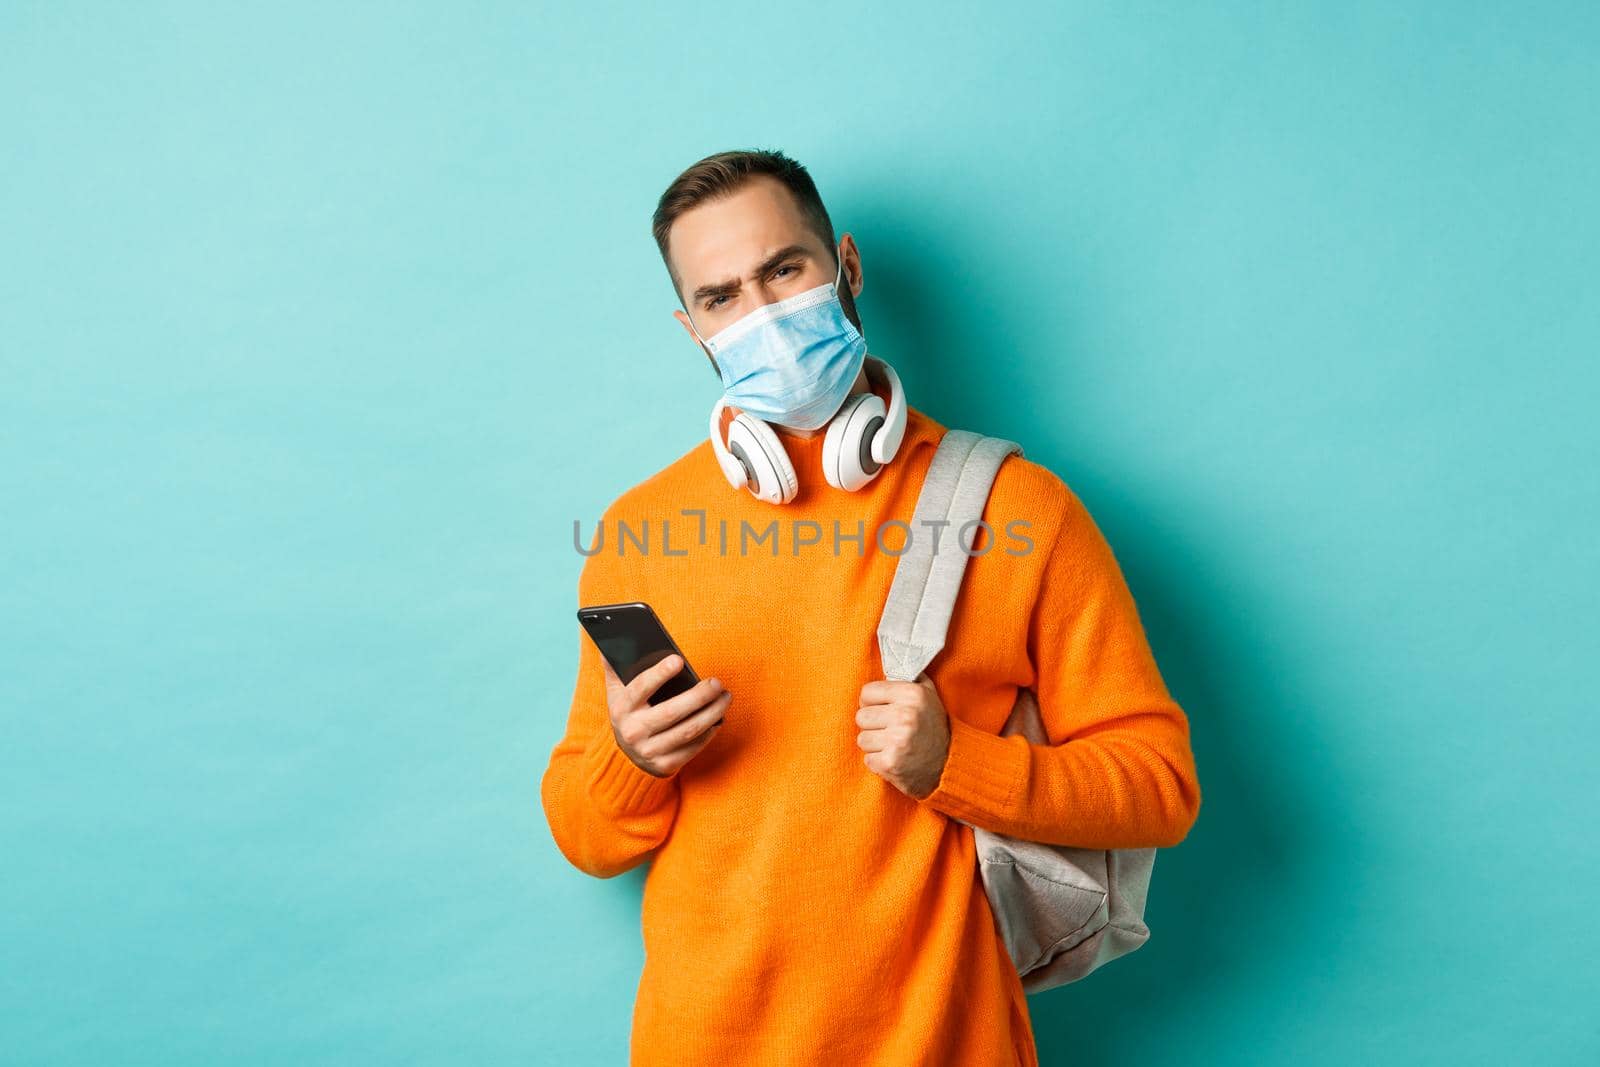 Skeptical and disappointed young man wearing face mask, holding backpack and mobile phone, frowning upset, standing over light blue background.